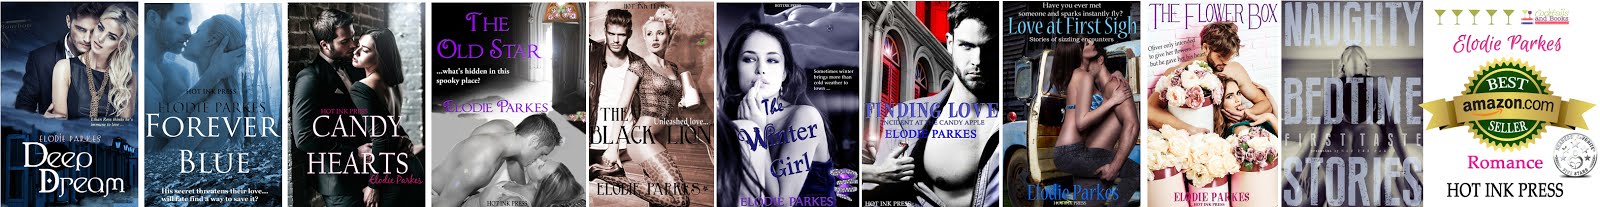 Elodie Parkes erotic romance from Hot Ink Press on KU